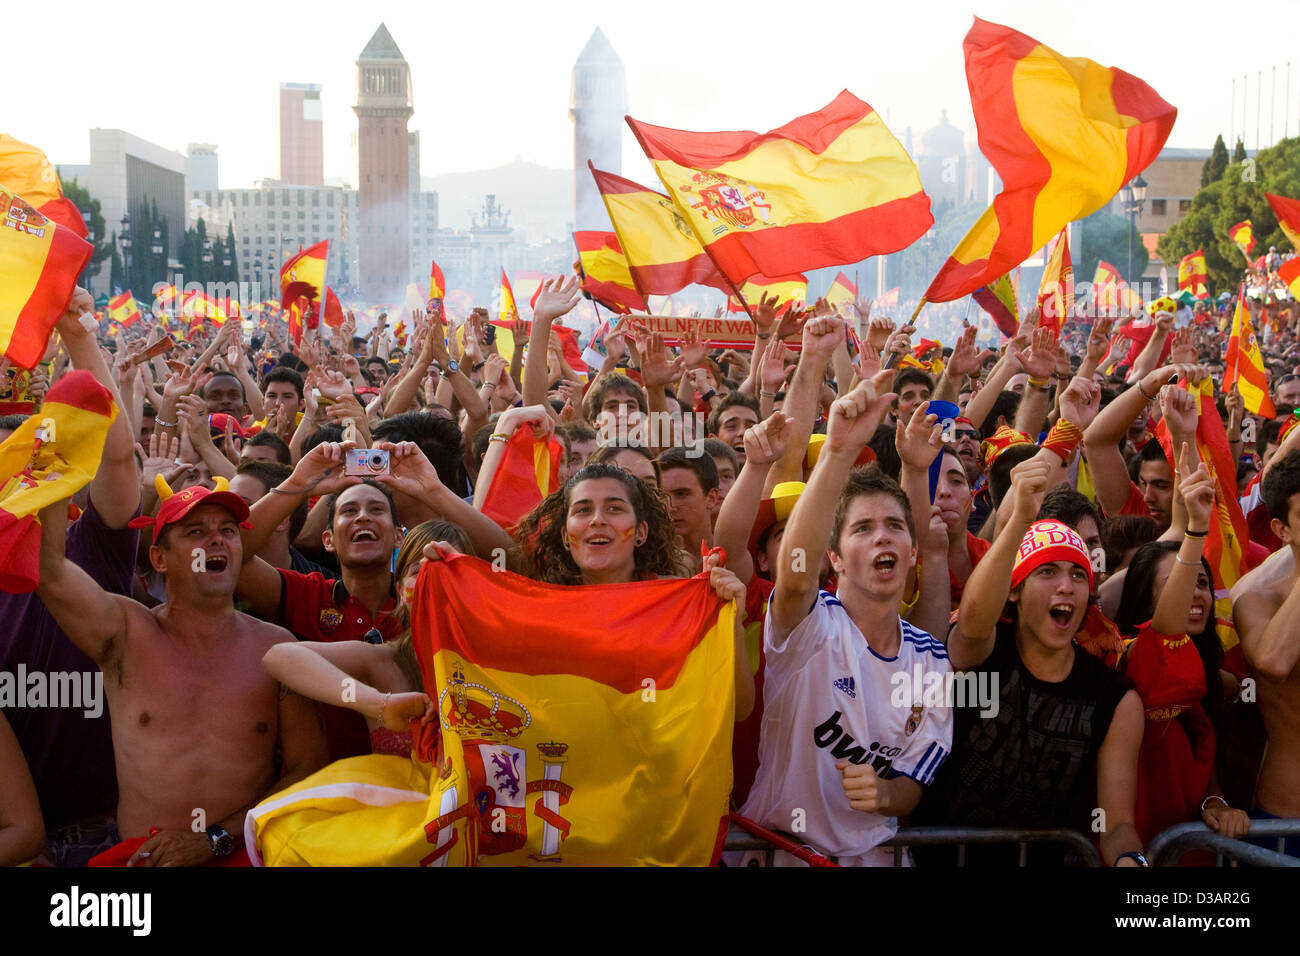 Barcelona, Spain, football fans watching the final match of the World Cup Stock Photo